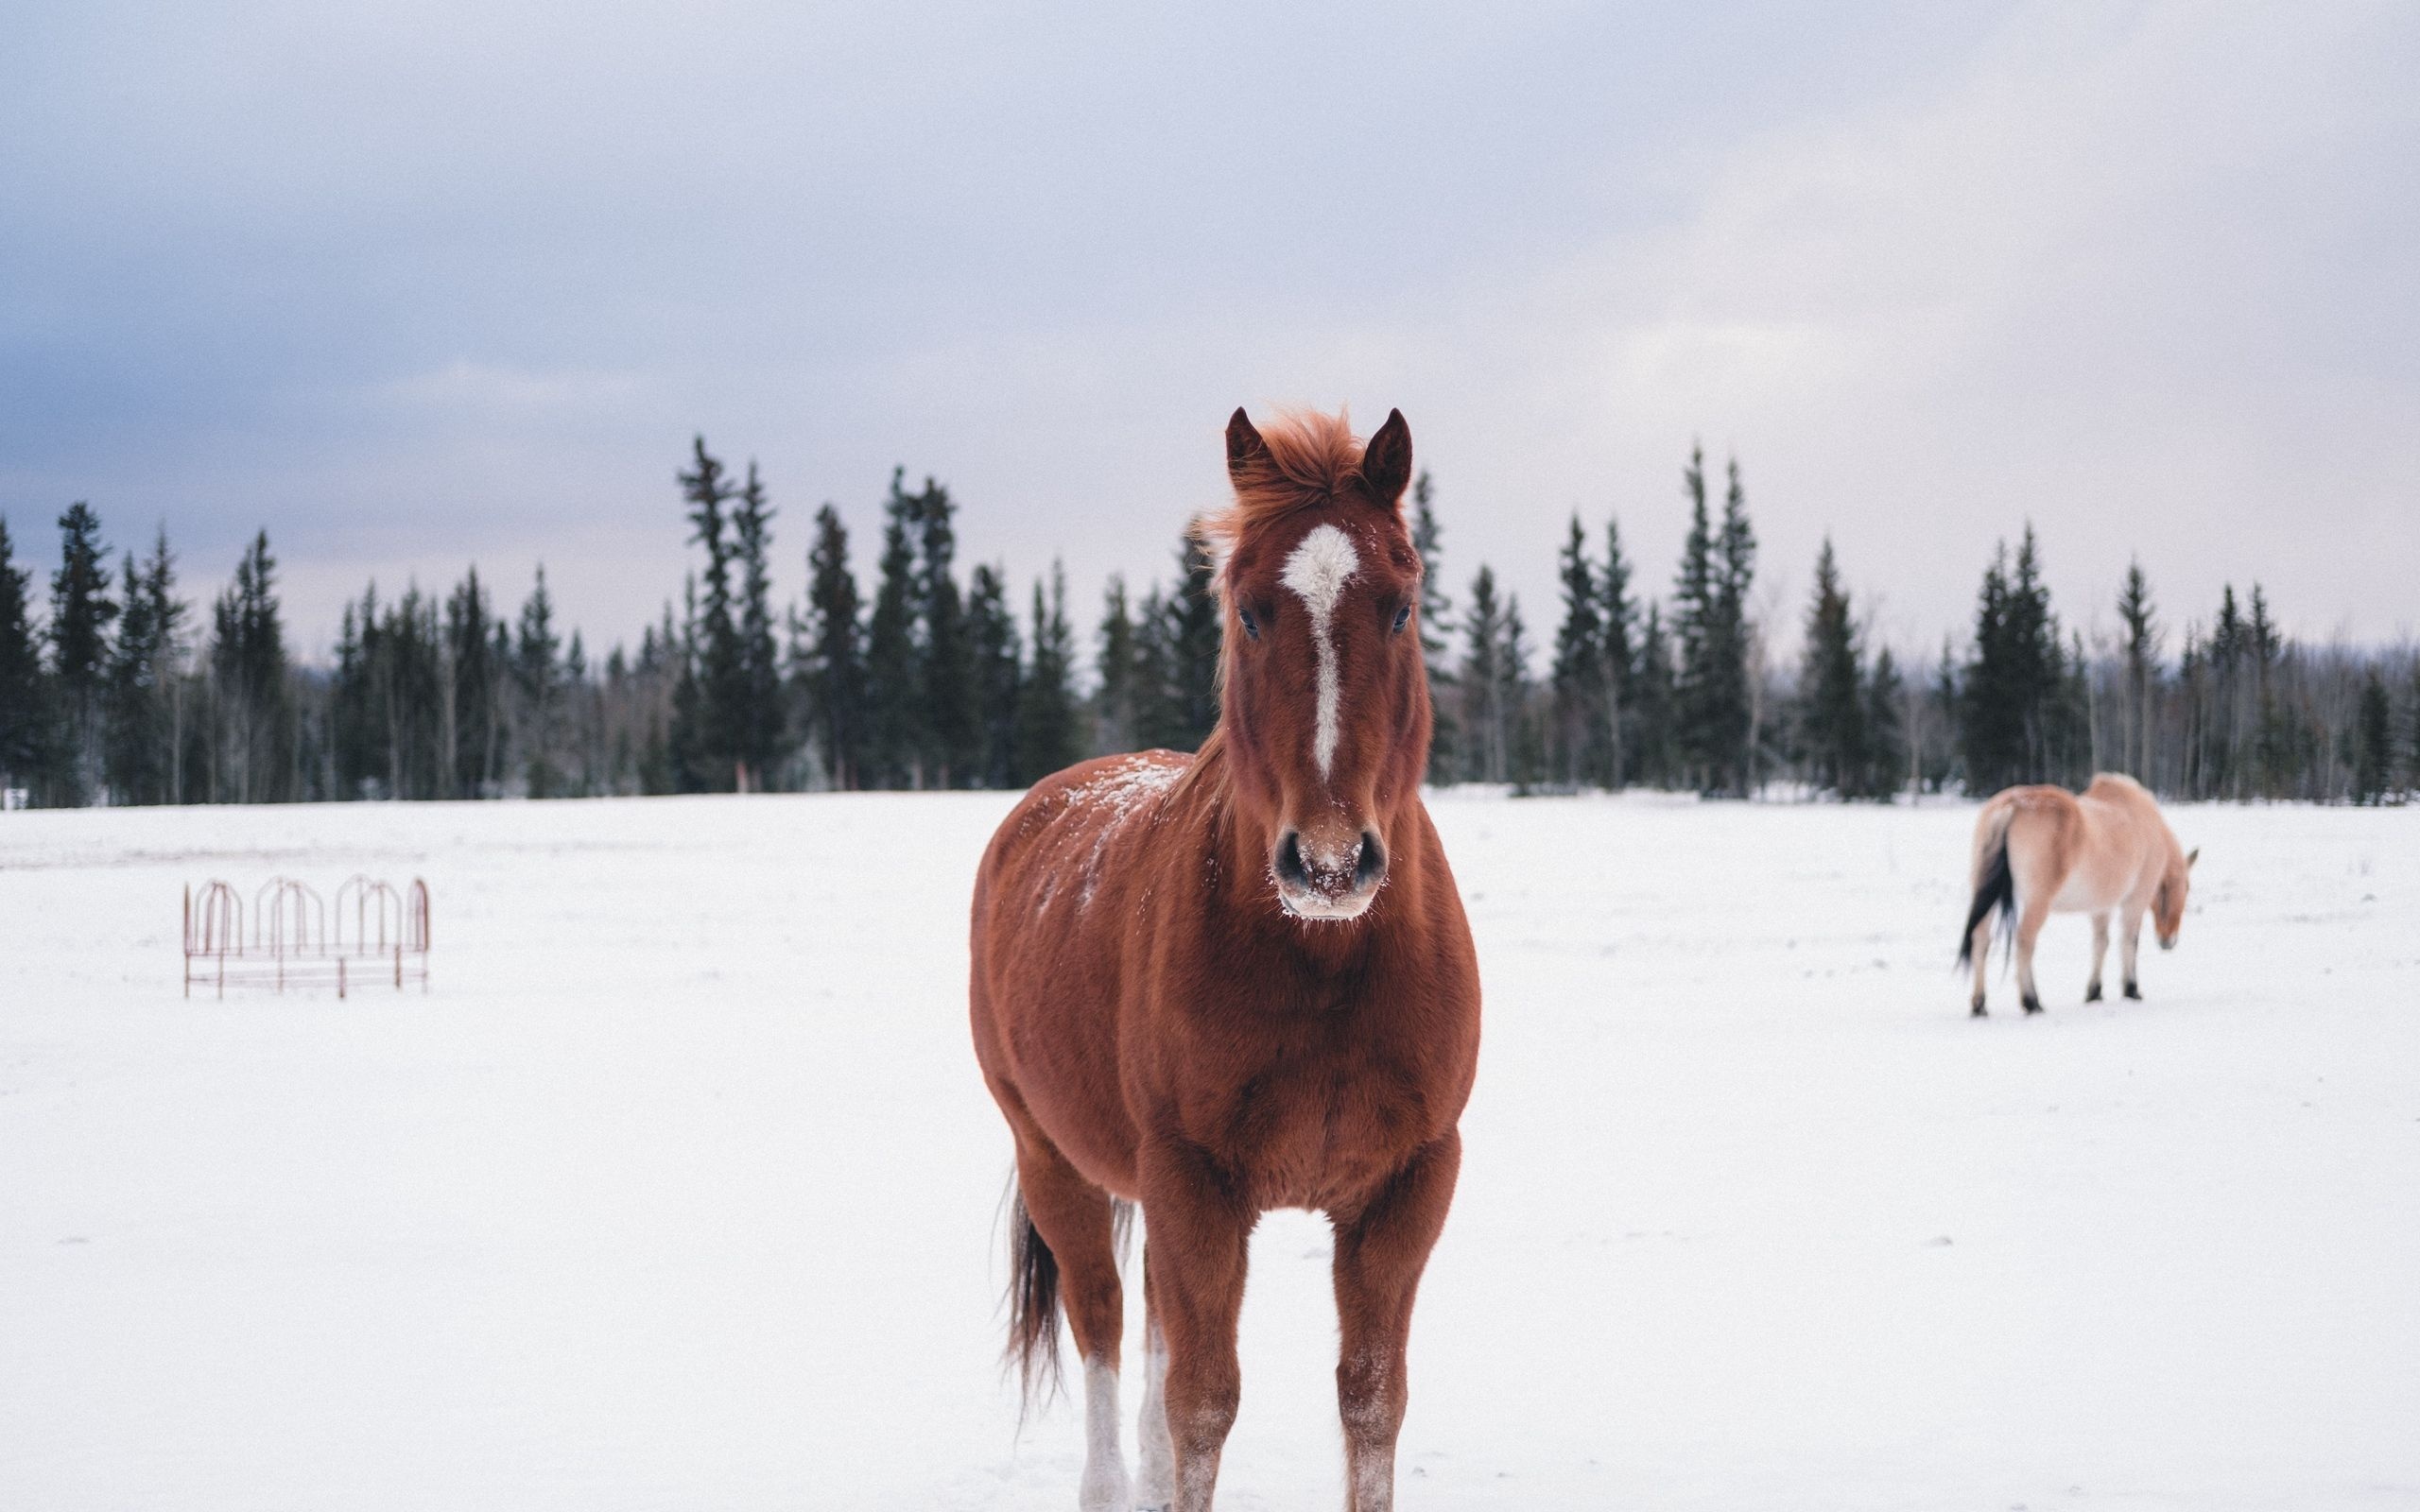 Horses in the Snow, Winter horse wallpapers, collection, 2560x1600 HD Desktop